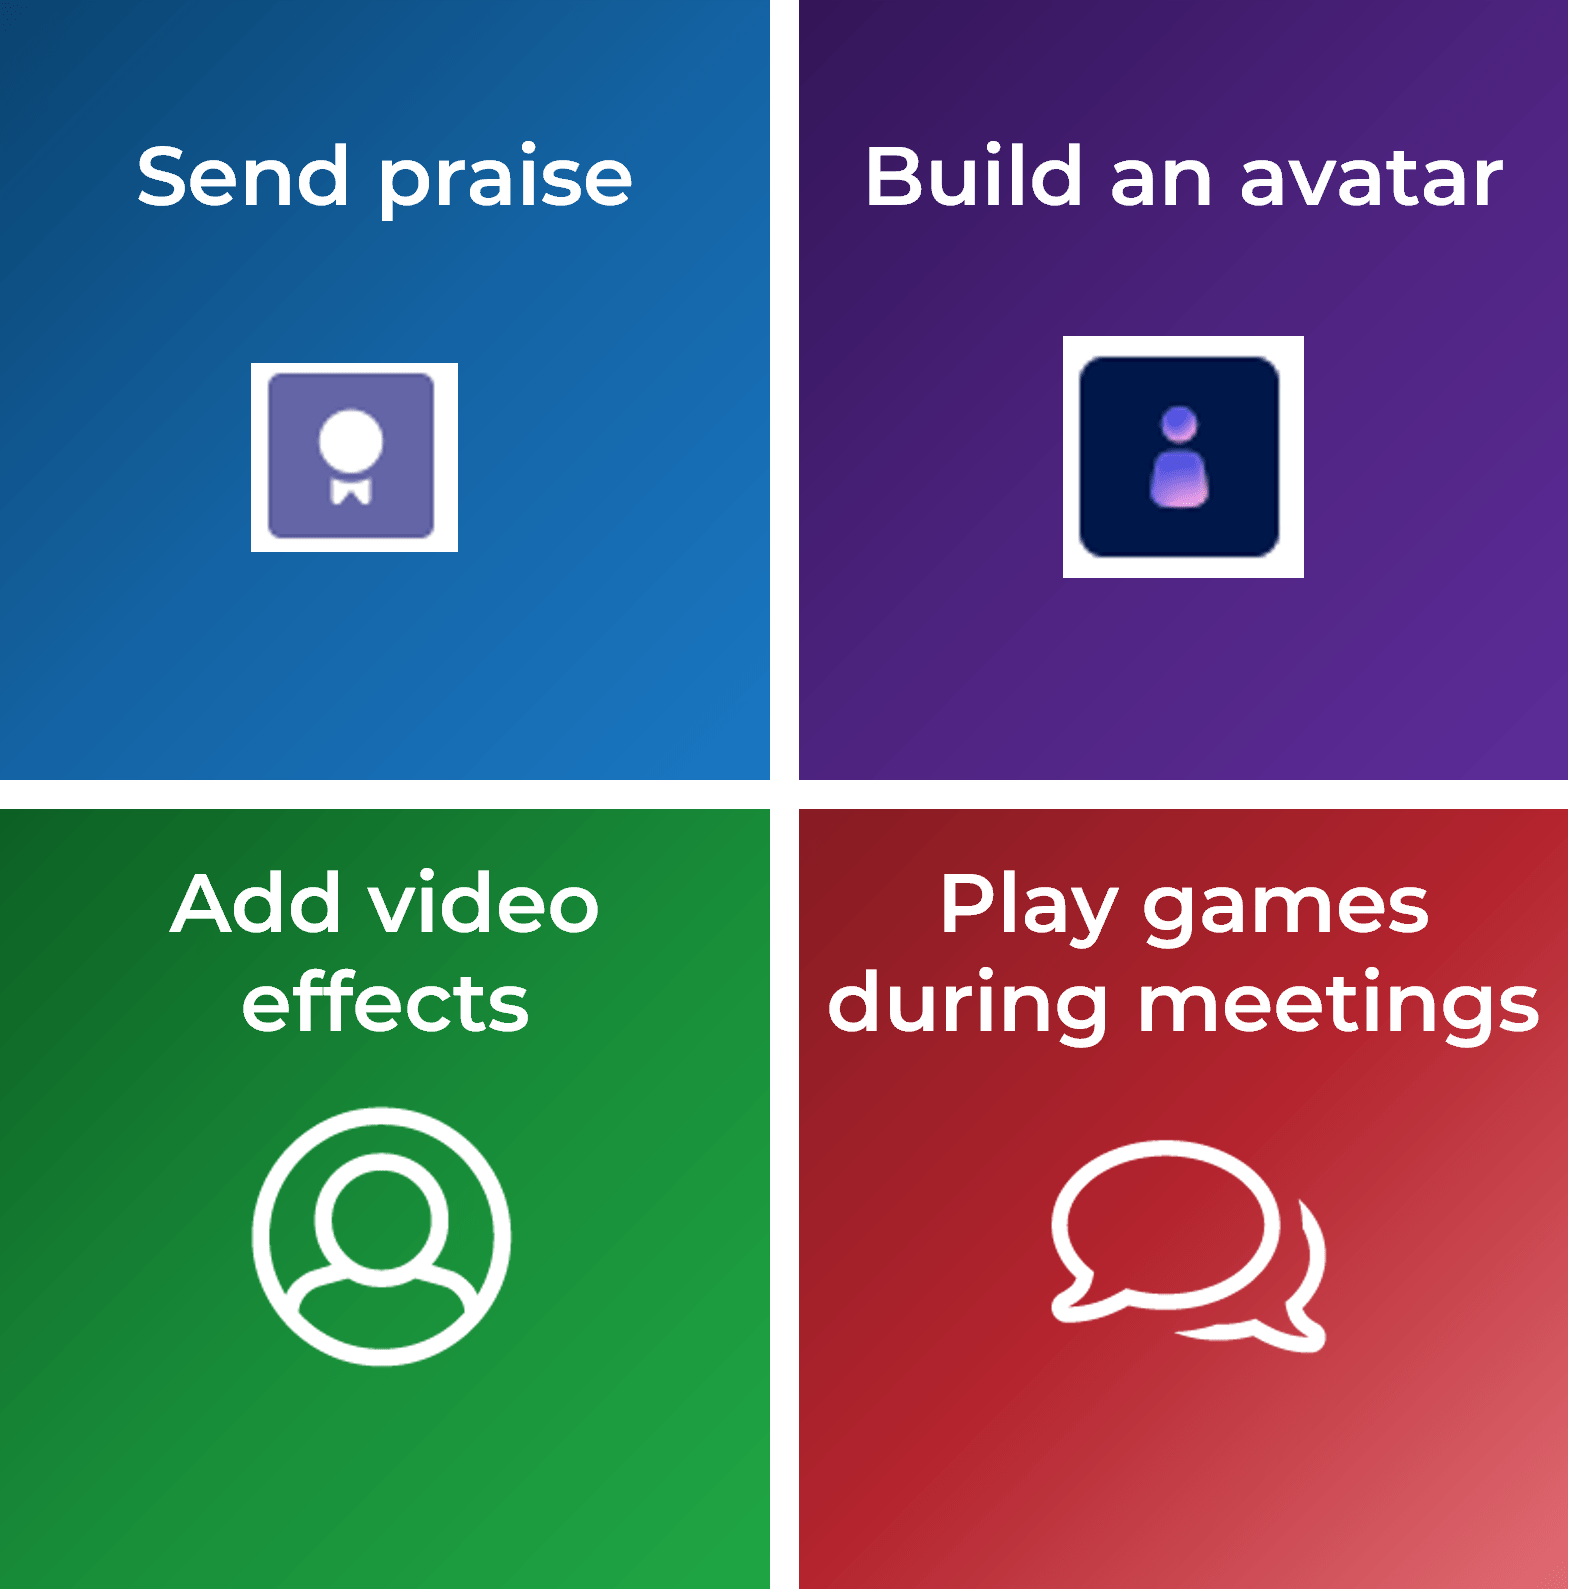 Samples of four features: 'Send praise', 'Build an avatar', 'Add video effects', and 'Play games during meetings'.